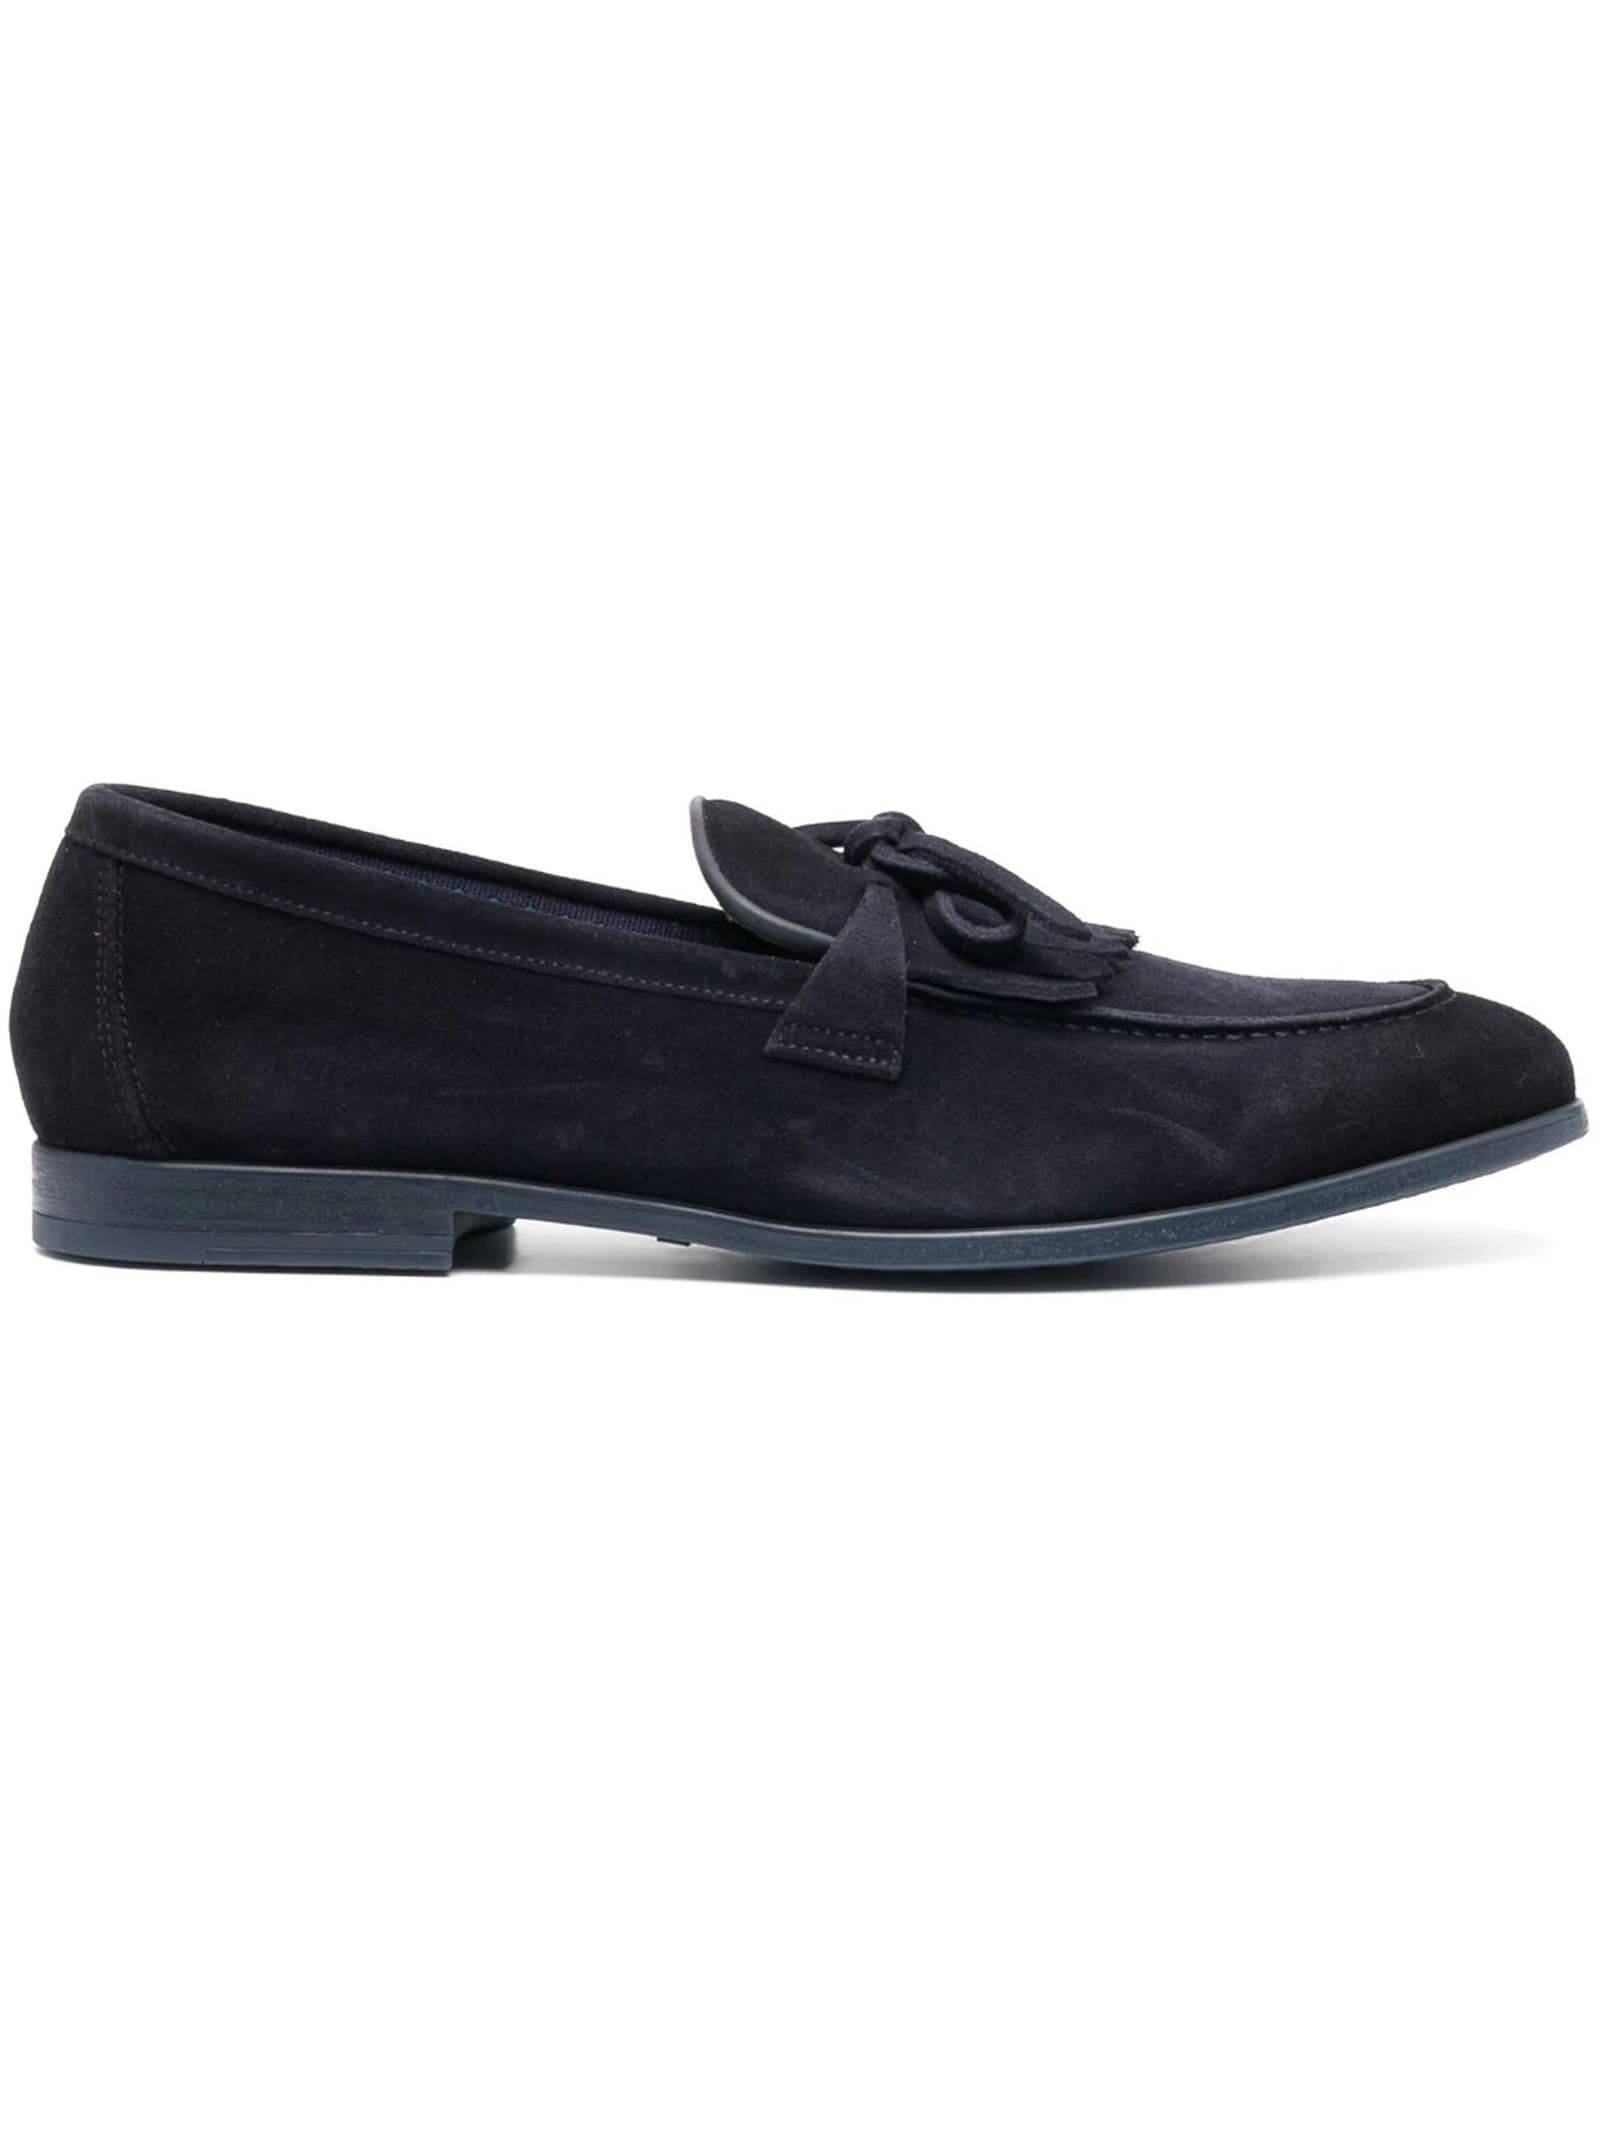 DOUCAL'S NAVY BLUE CALF SUEDE LOAFERS